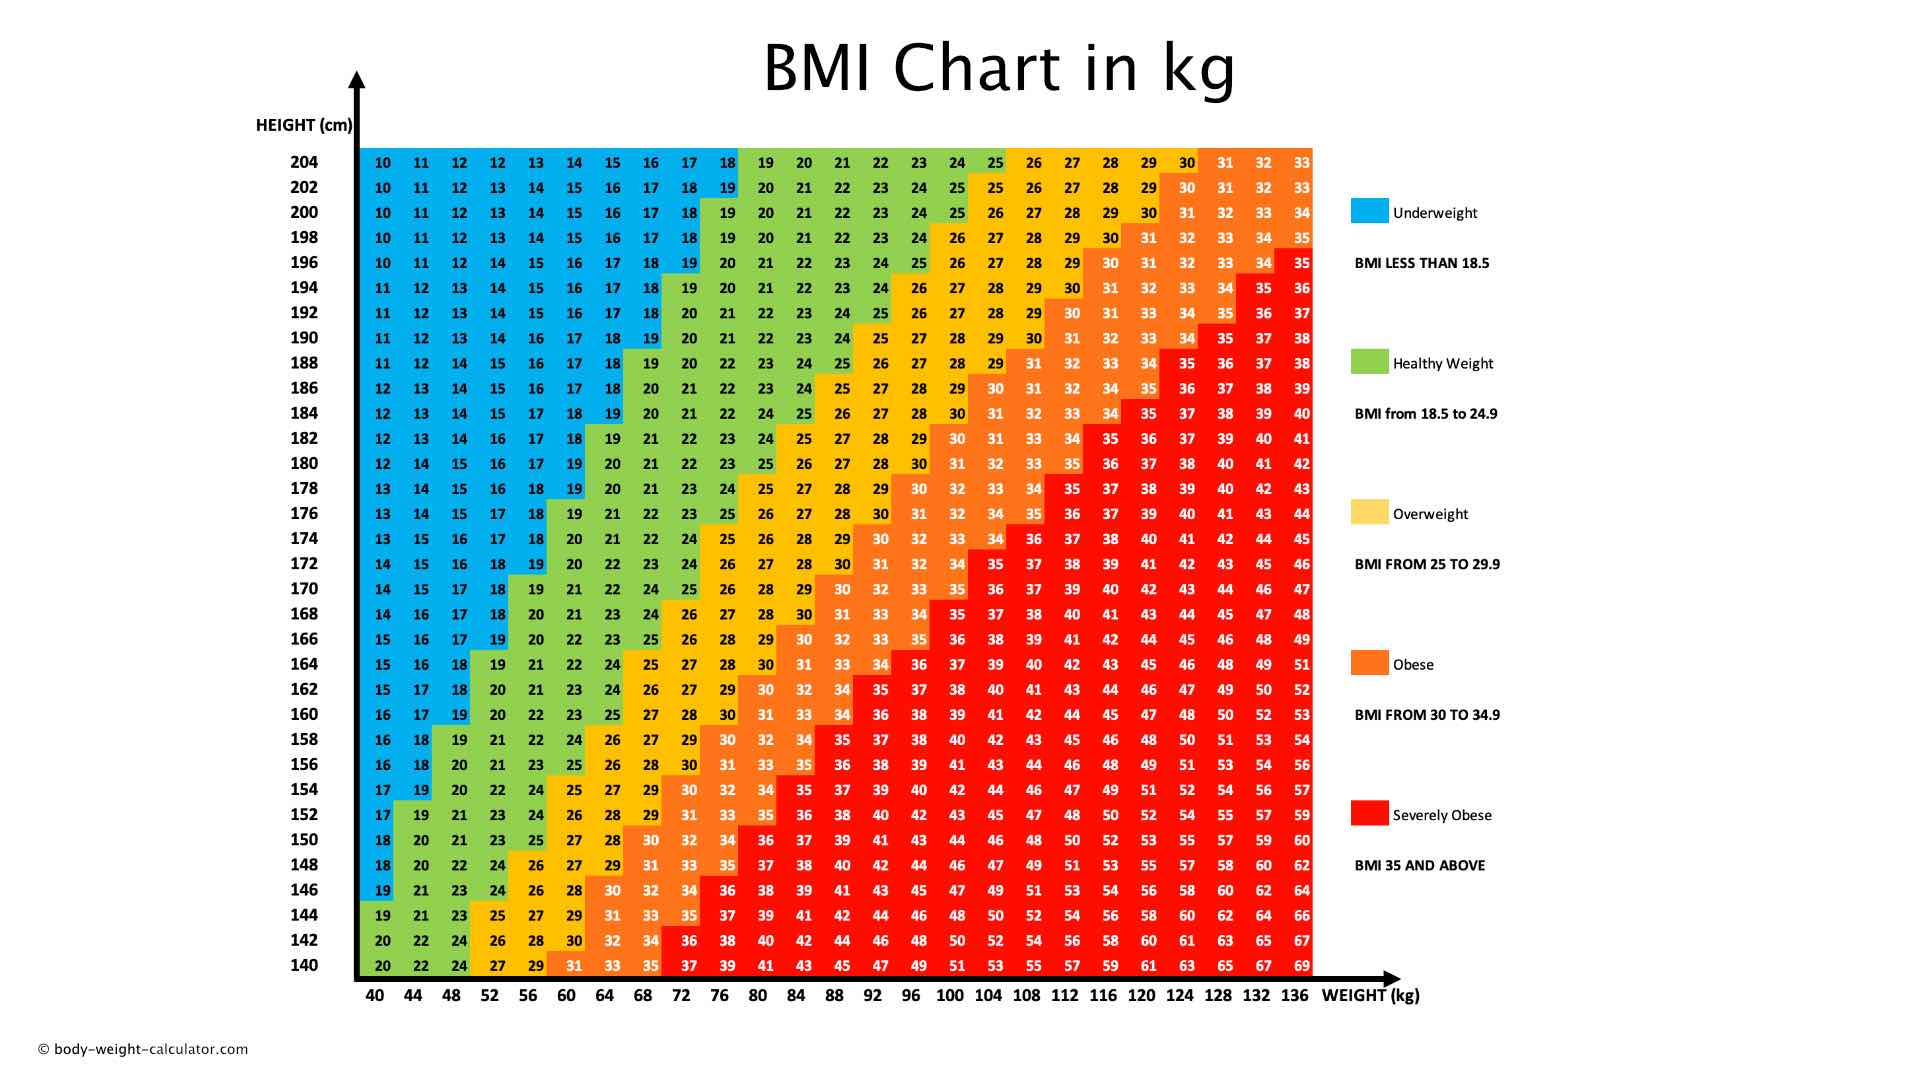 BMI chart for females by age in South Africa - 2022